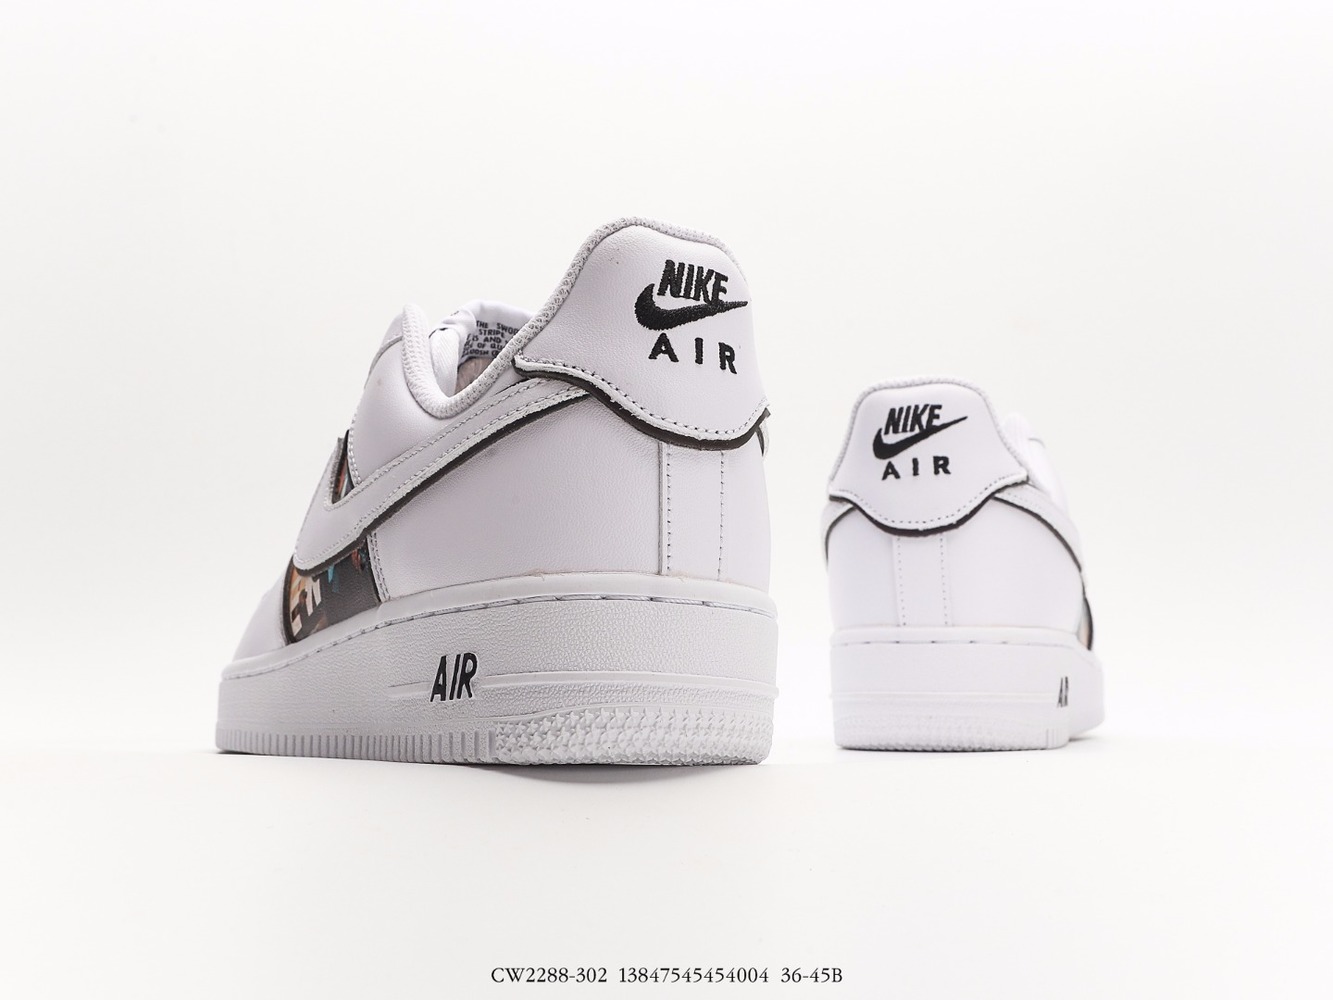 Grand Theft Auto x Nike Air Force 1 07 LV8 «blanc /Grand Theft Auto» _CW2288-302